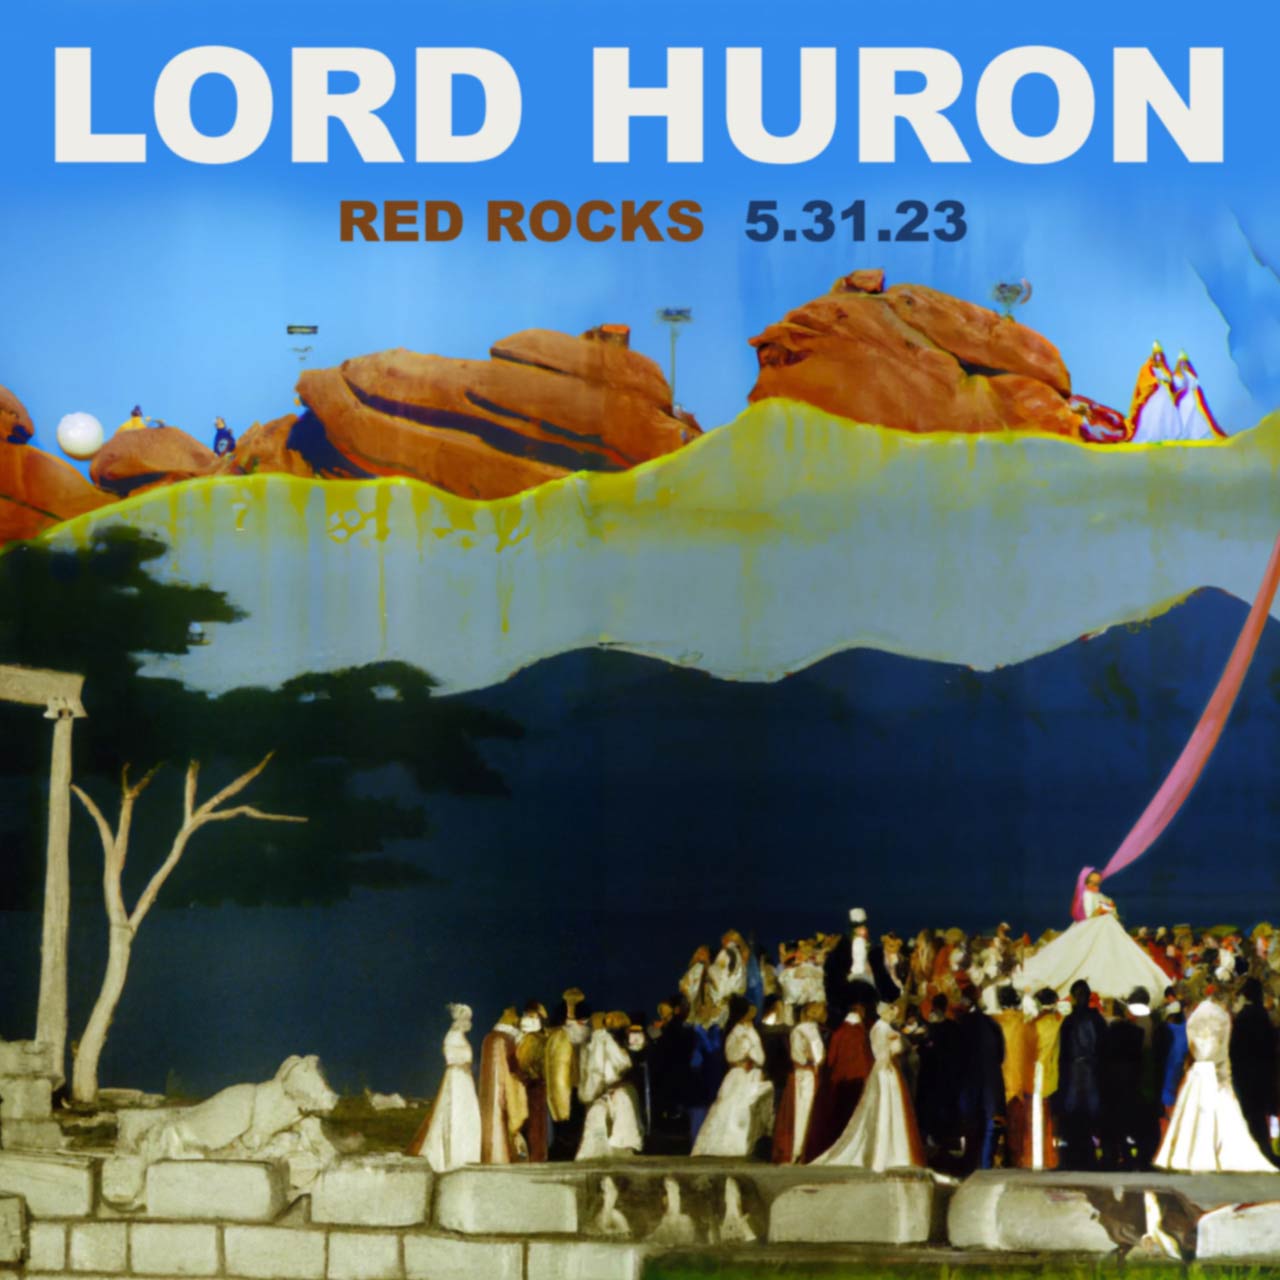 Lord Huron Returns To Red Rocks Amphitheatre This Spring